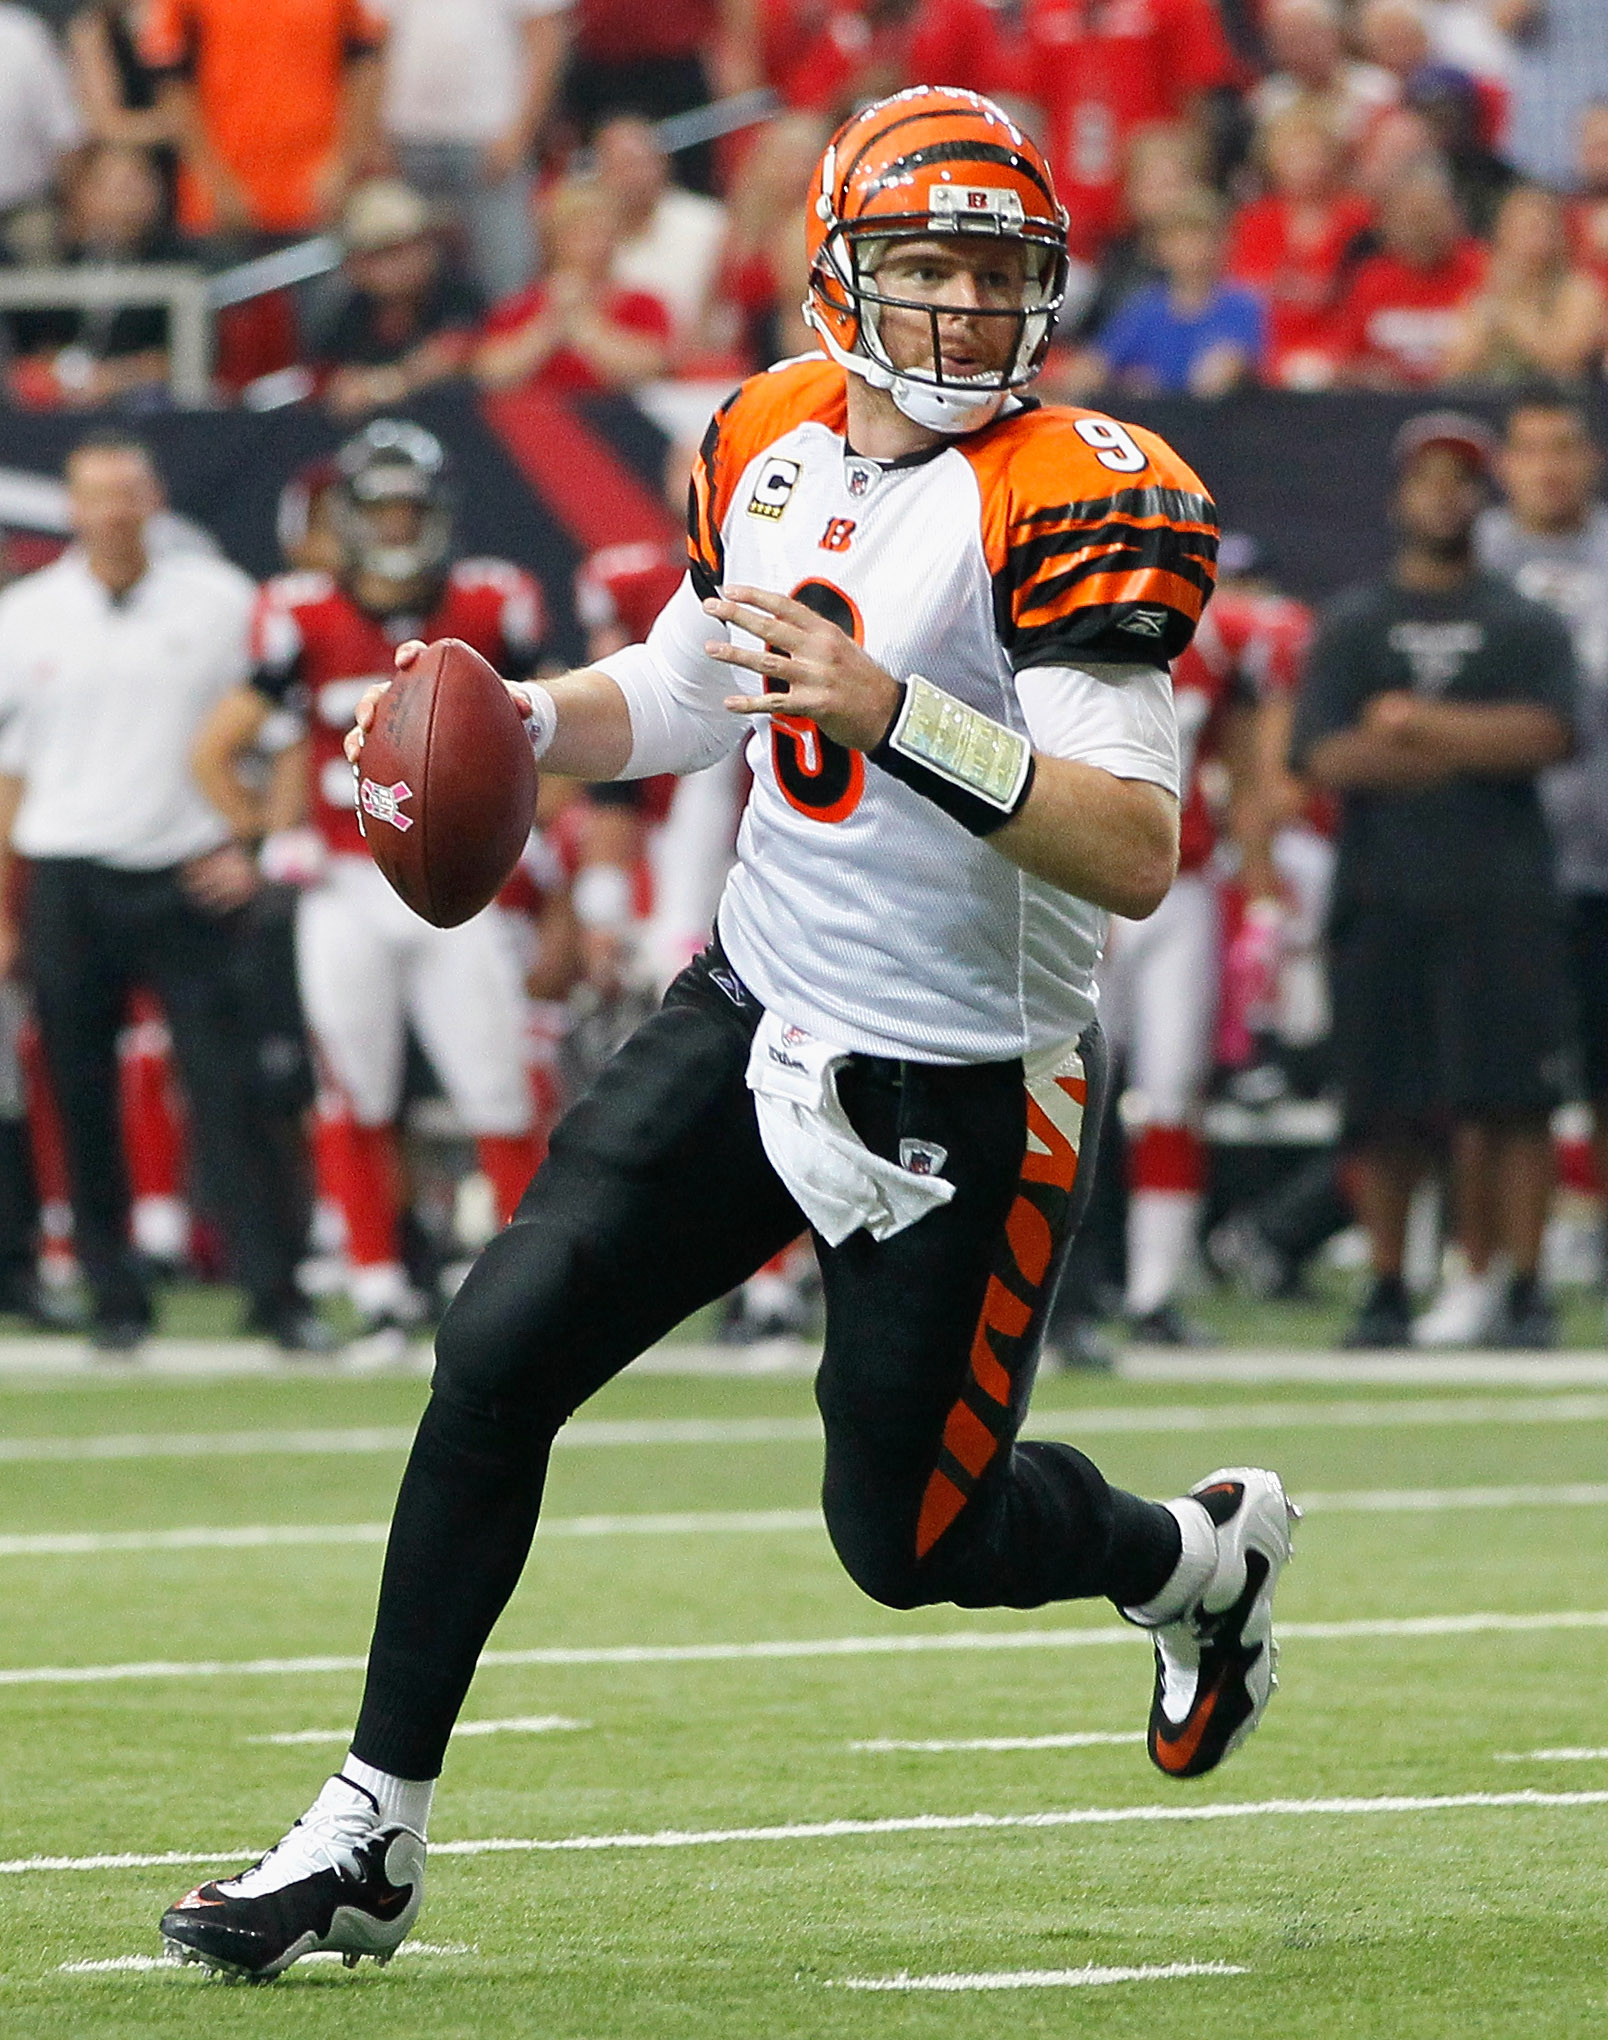 ATLANTA - OCTOBER 24:  Quarterback Carson Palmer #9 of the Cincinnati Bengals rushes out of the pocket against the Atlanta Falcons at Georgia Dome on October 24, 2010 in Atlanta, Georgia.  (Photo by Kevin C. Cox/Getty Images)